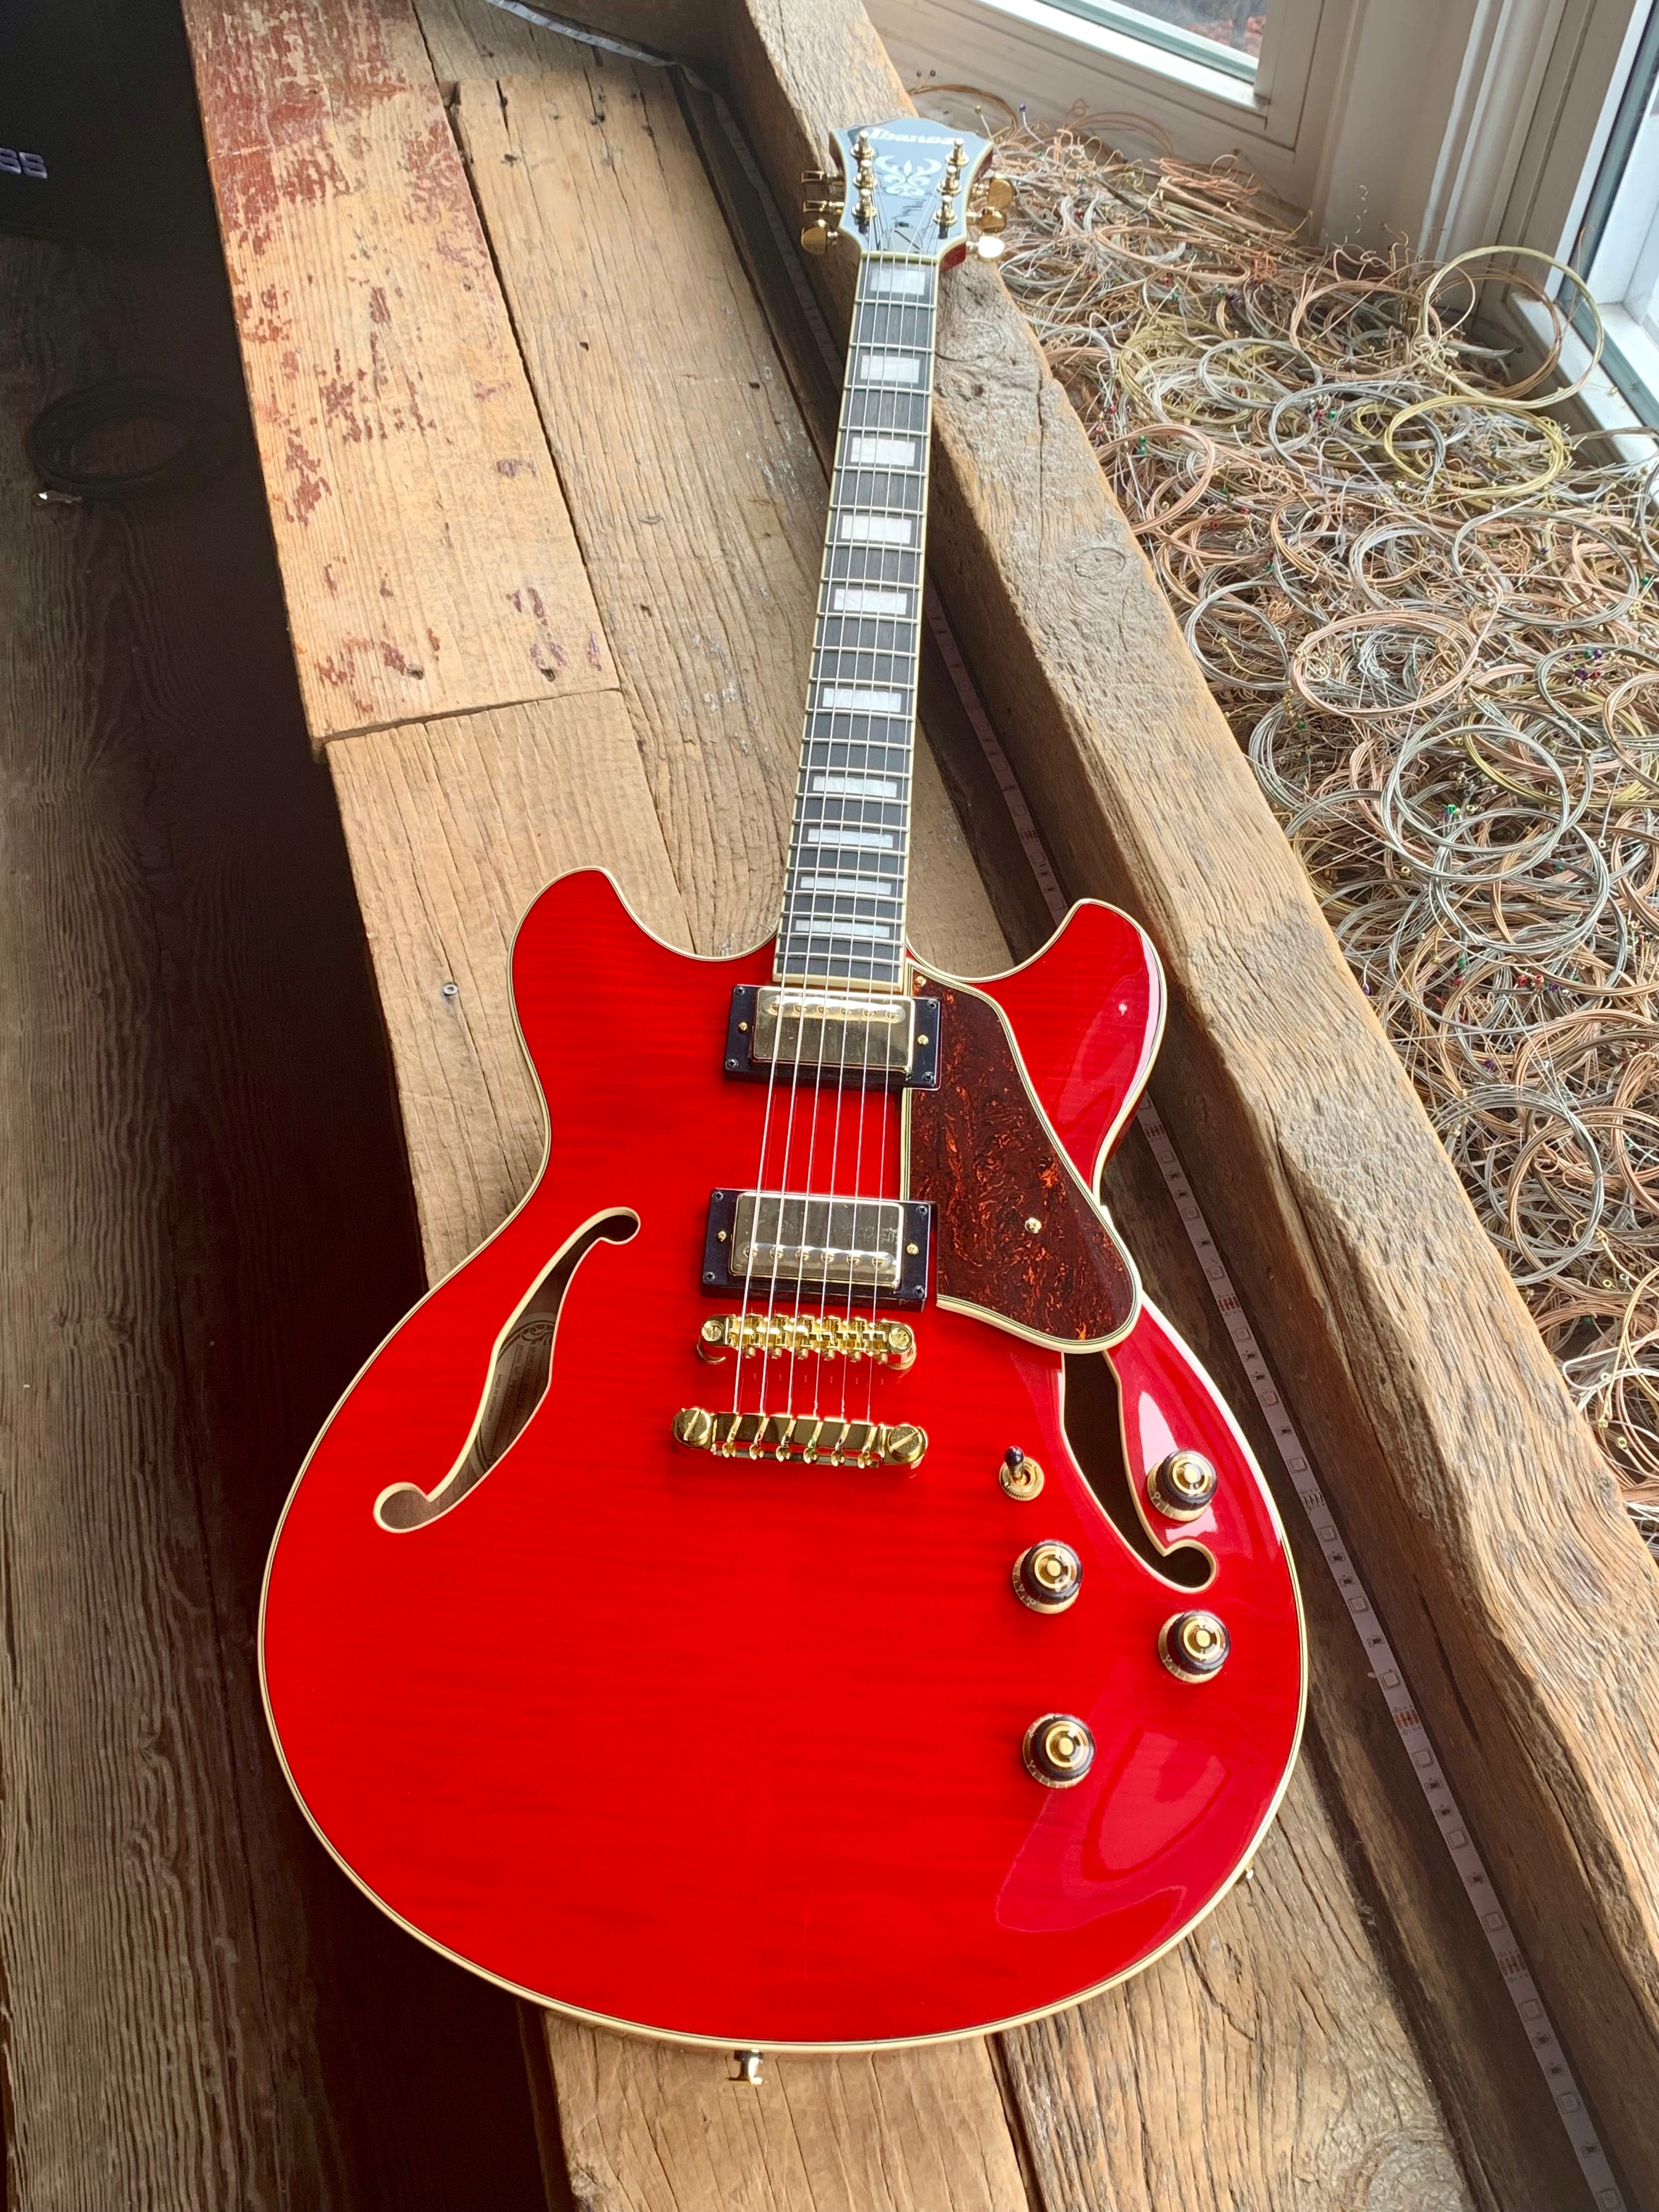 Ibanez AS93FM-TCD Artcore Expressionist Semi-Hollow Transparent Cherry